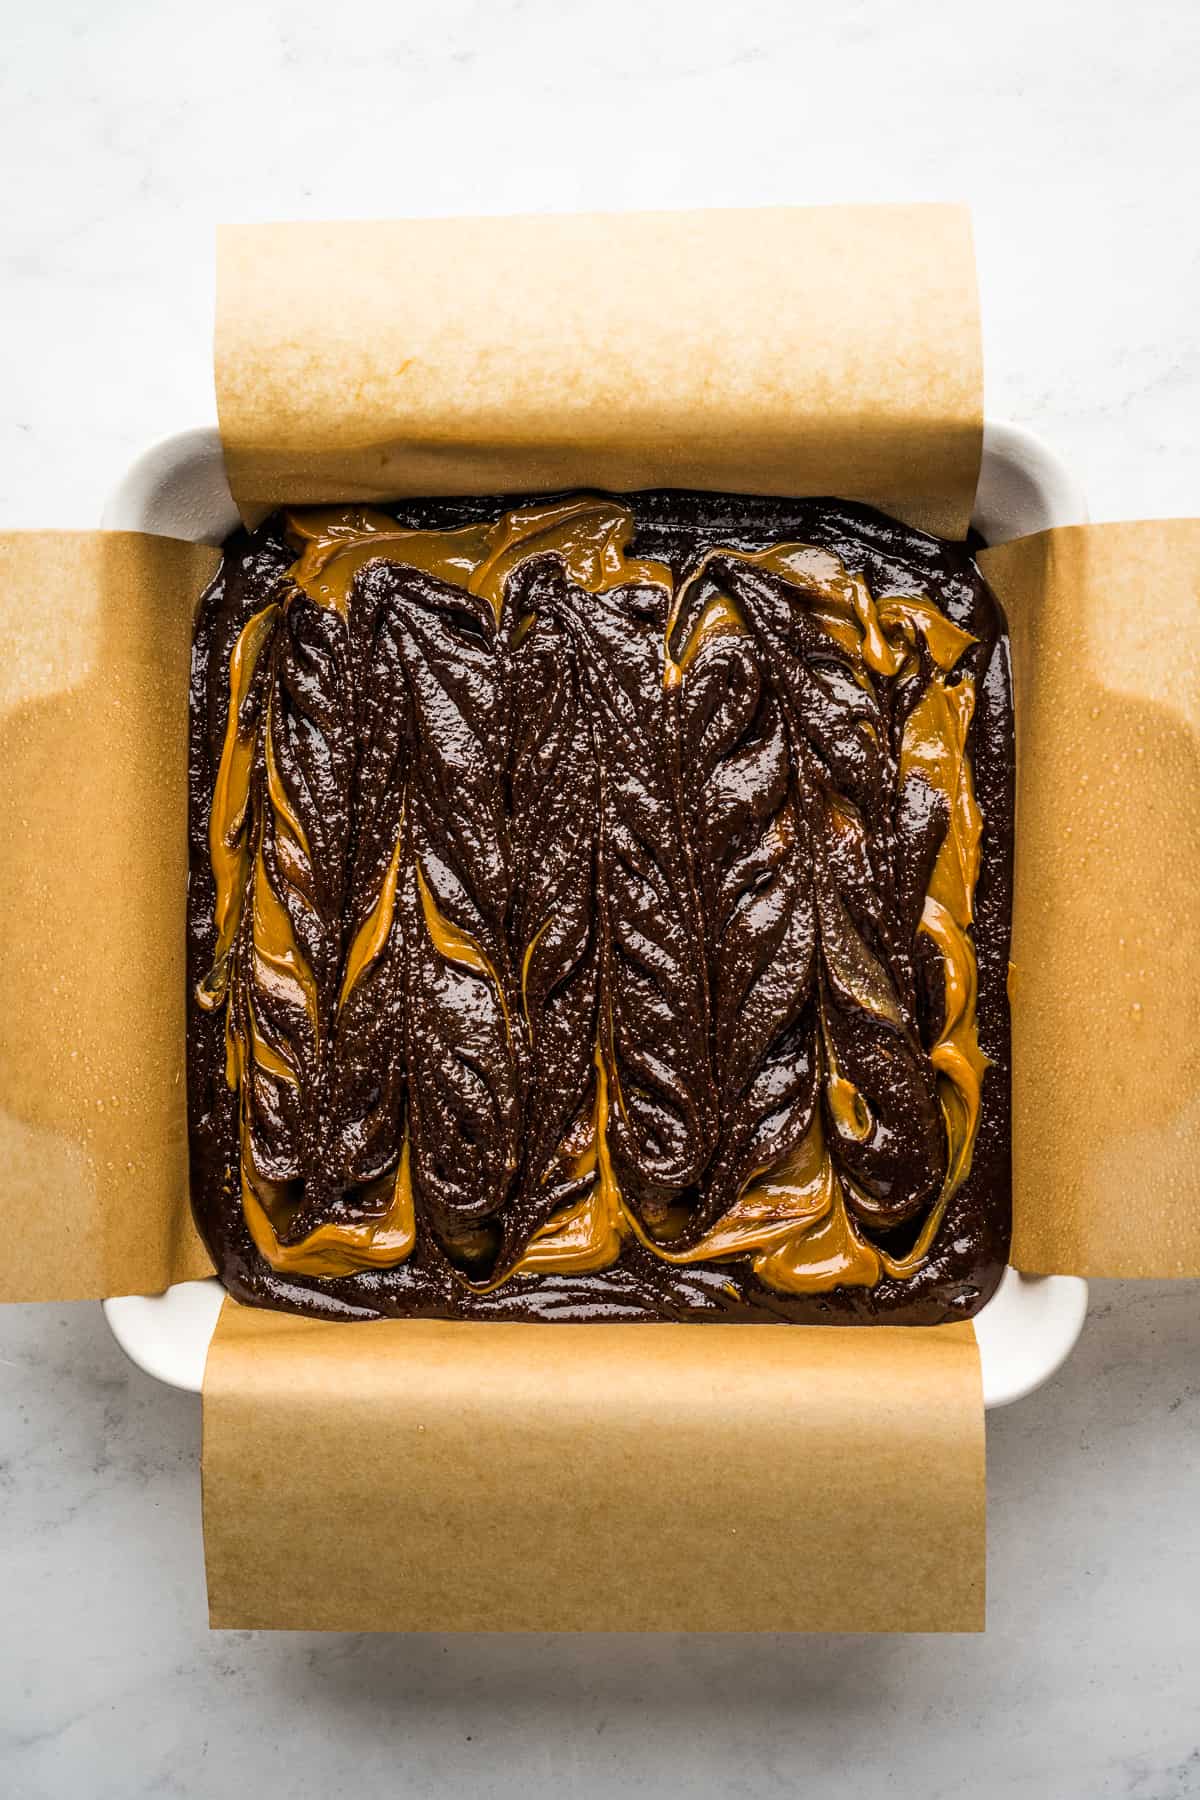 Dulce de leche brownie batter in a square baking dish lined with parchment paper